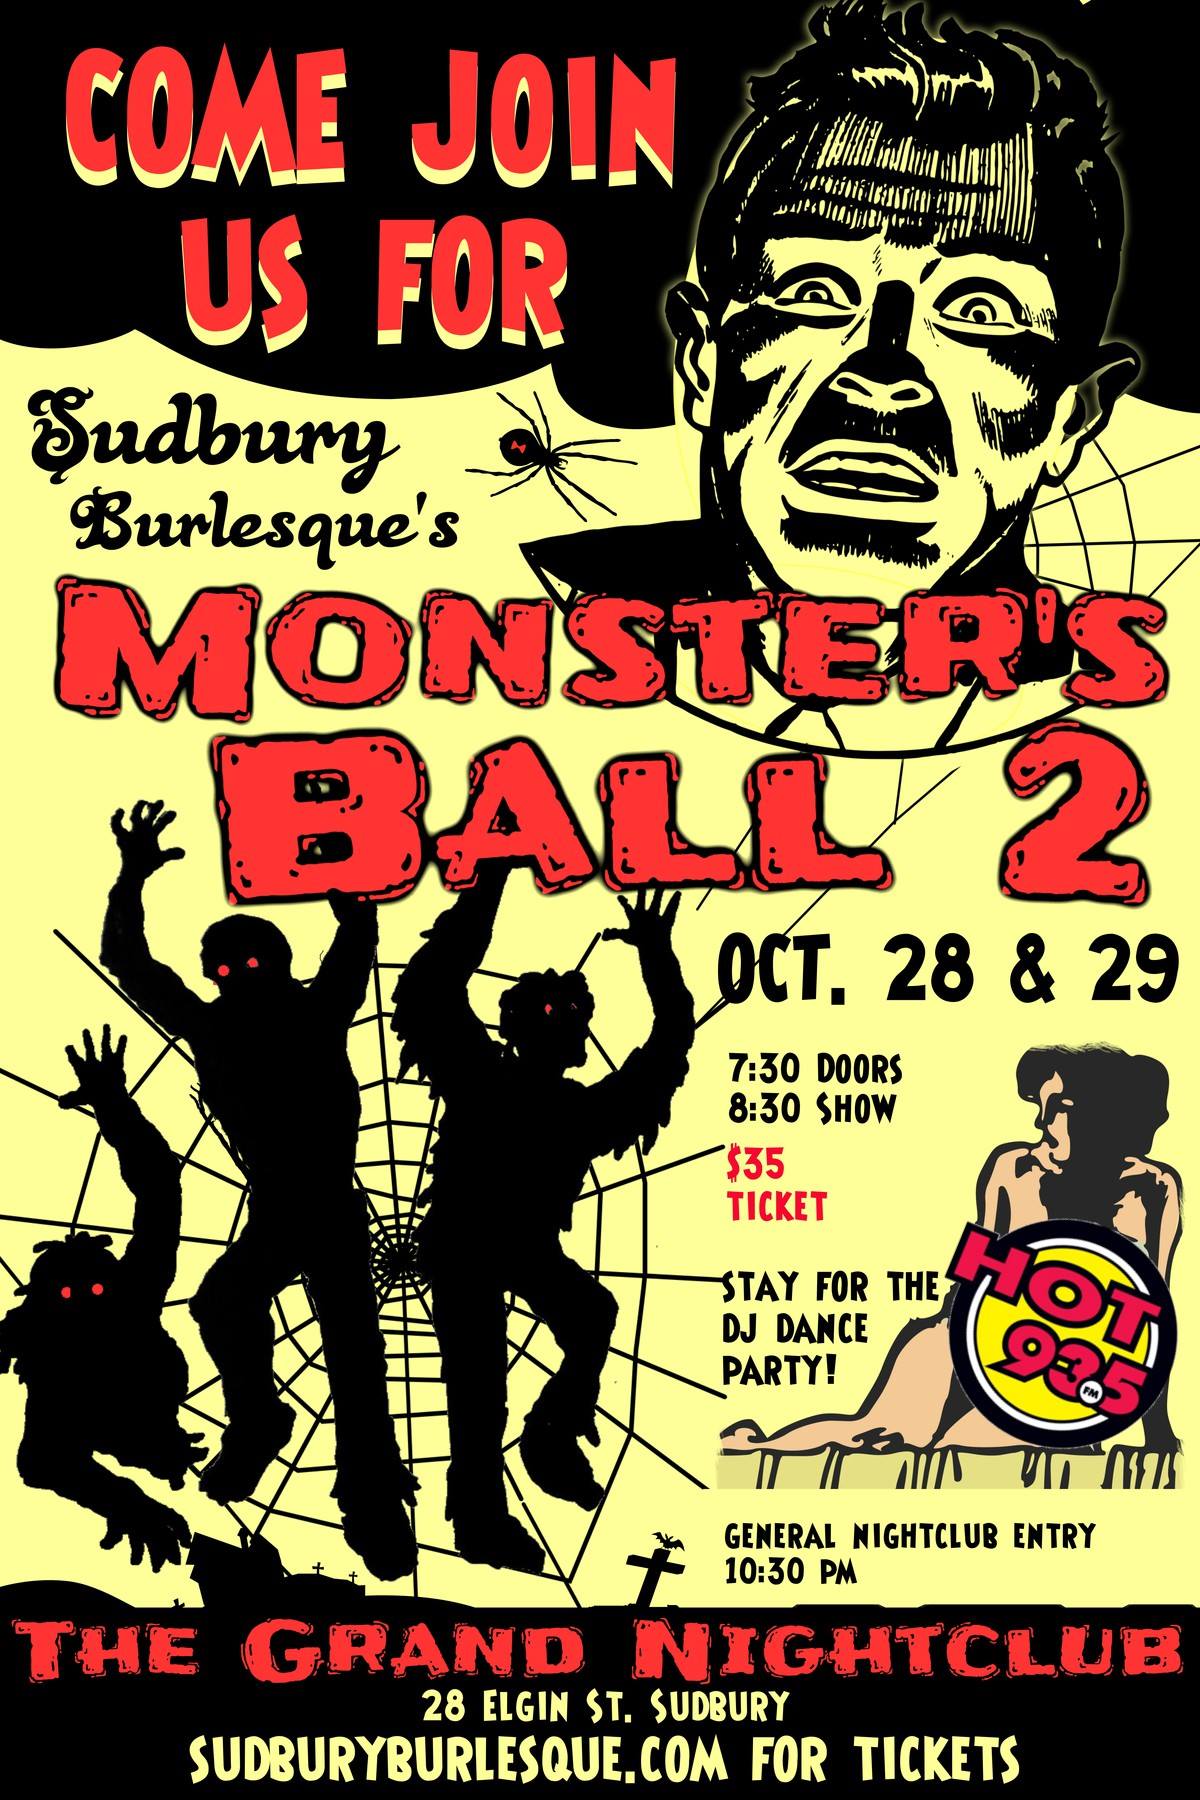 THE MONSTER’S BALL IS BACK GUYS AND GHOULS